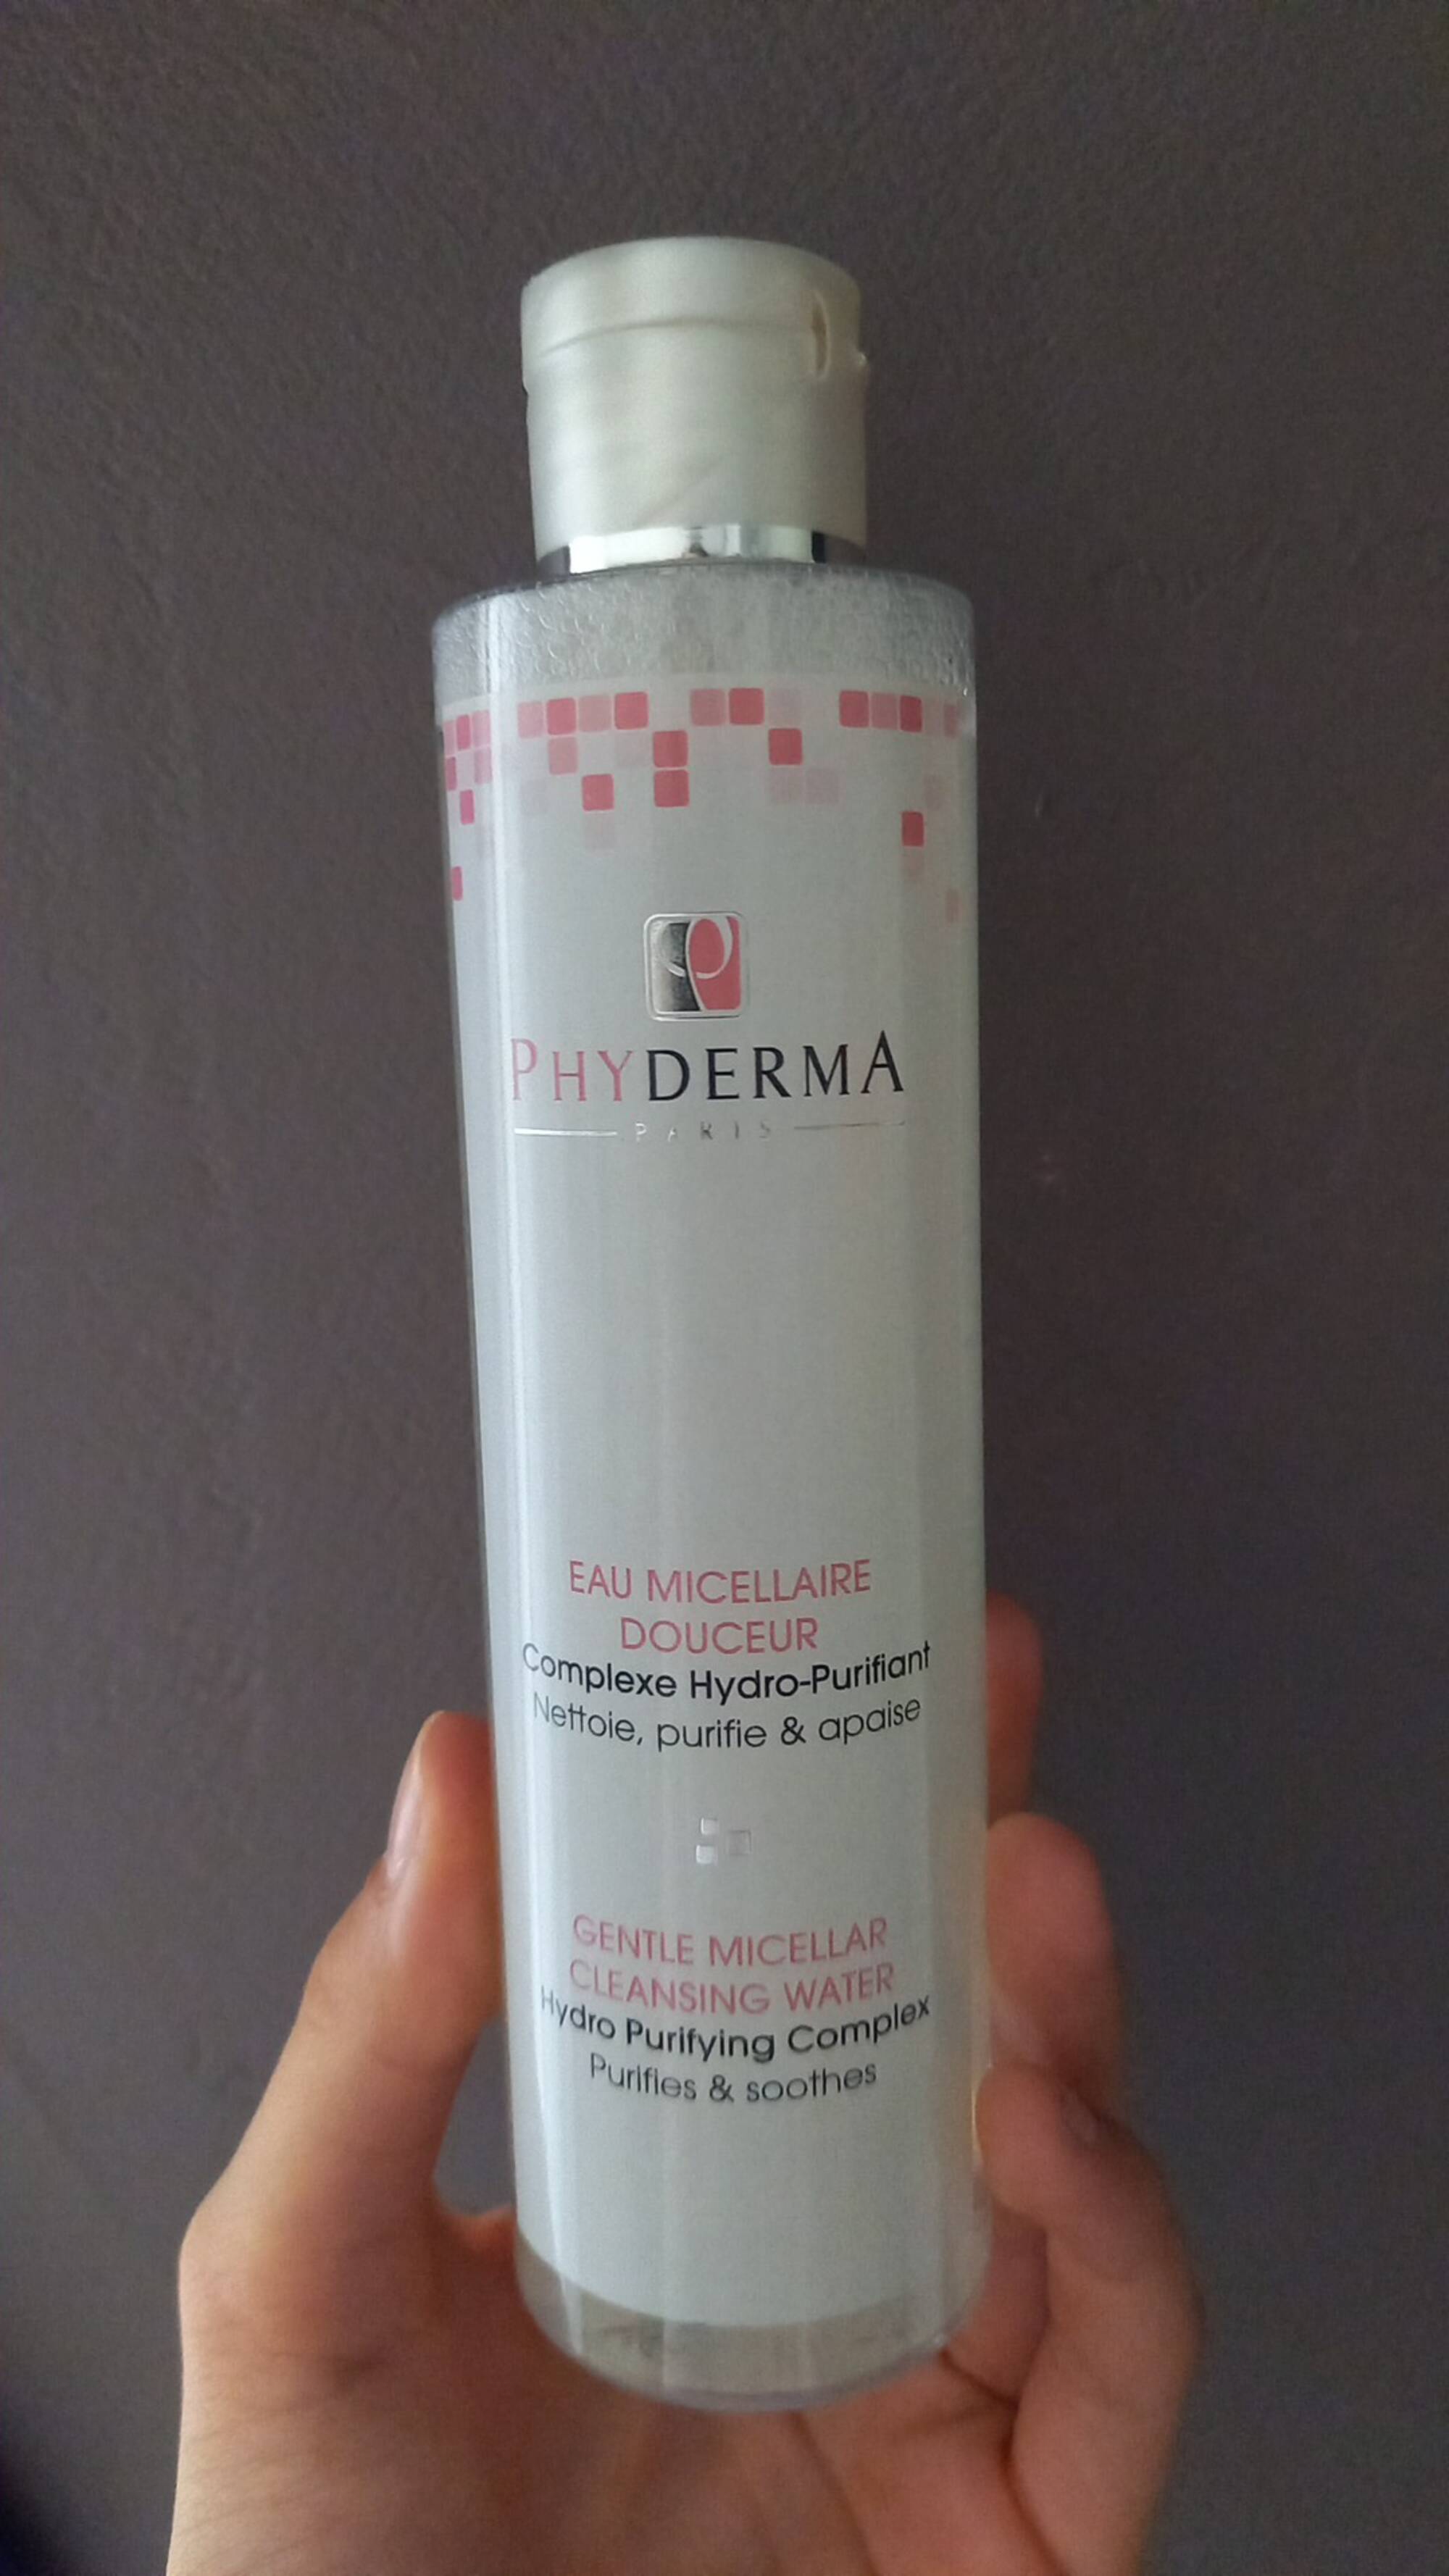 PHYDERMA - Eau micellaire douceur - Complexe hydro-purifiant